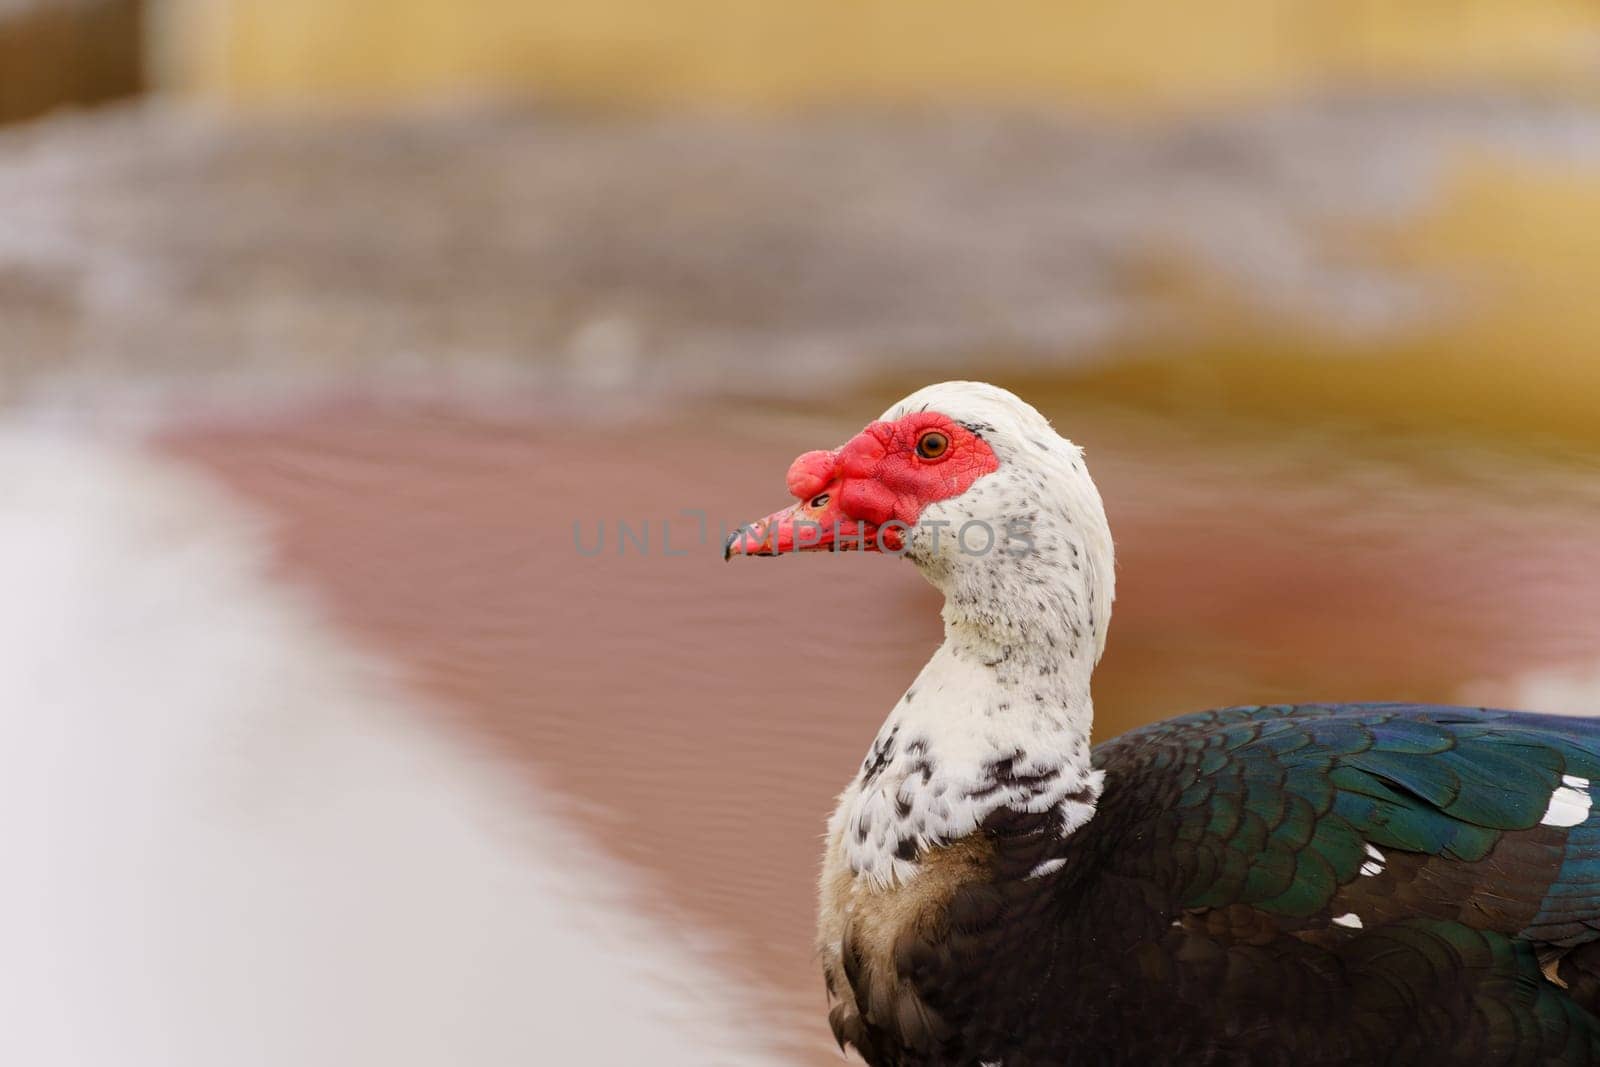 Muscovy Duck Foraging at Farmstead at Dusk. Selective focus